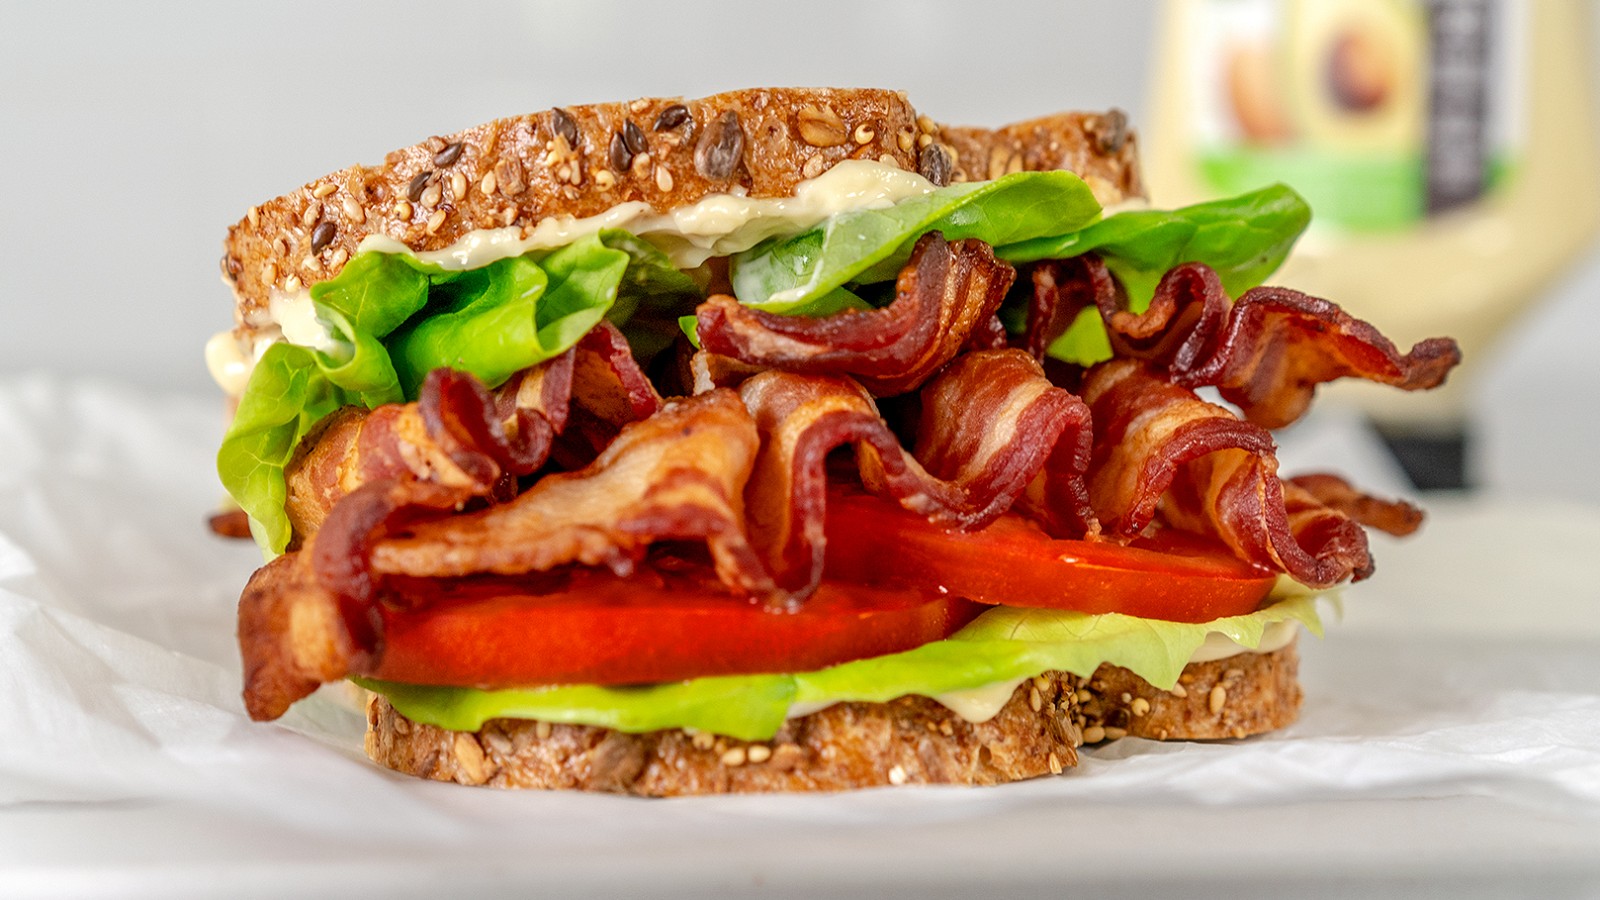 Image of How to Make a BLT